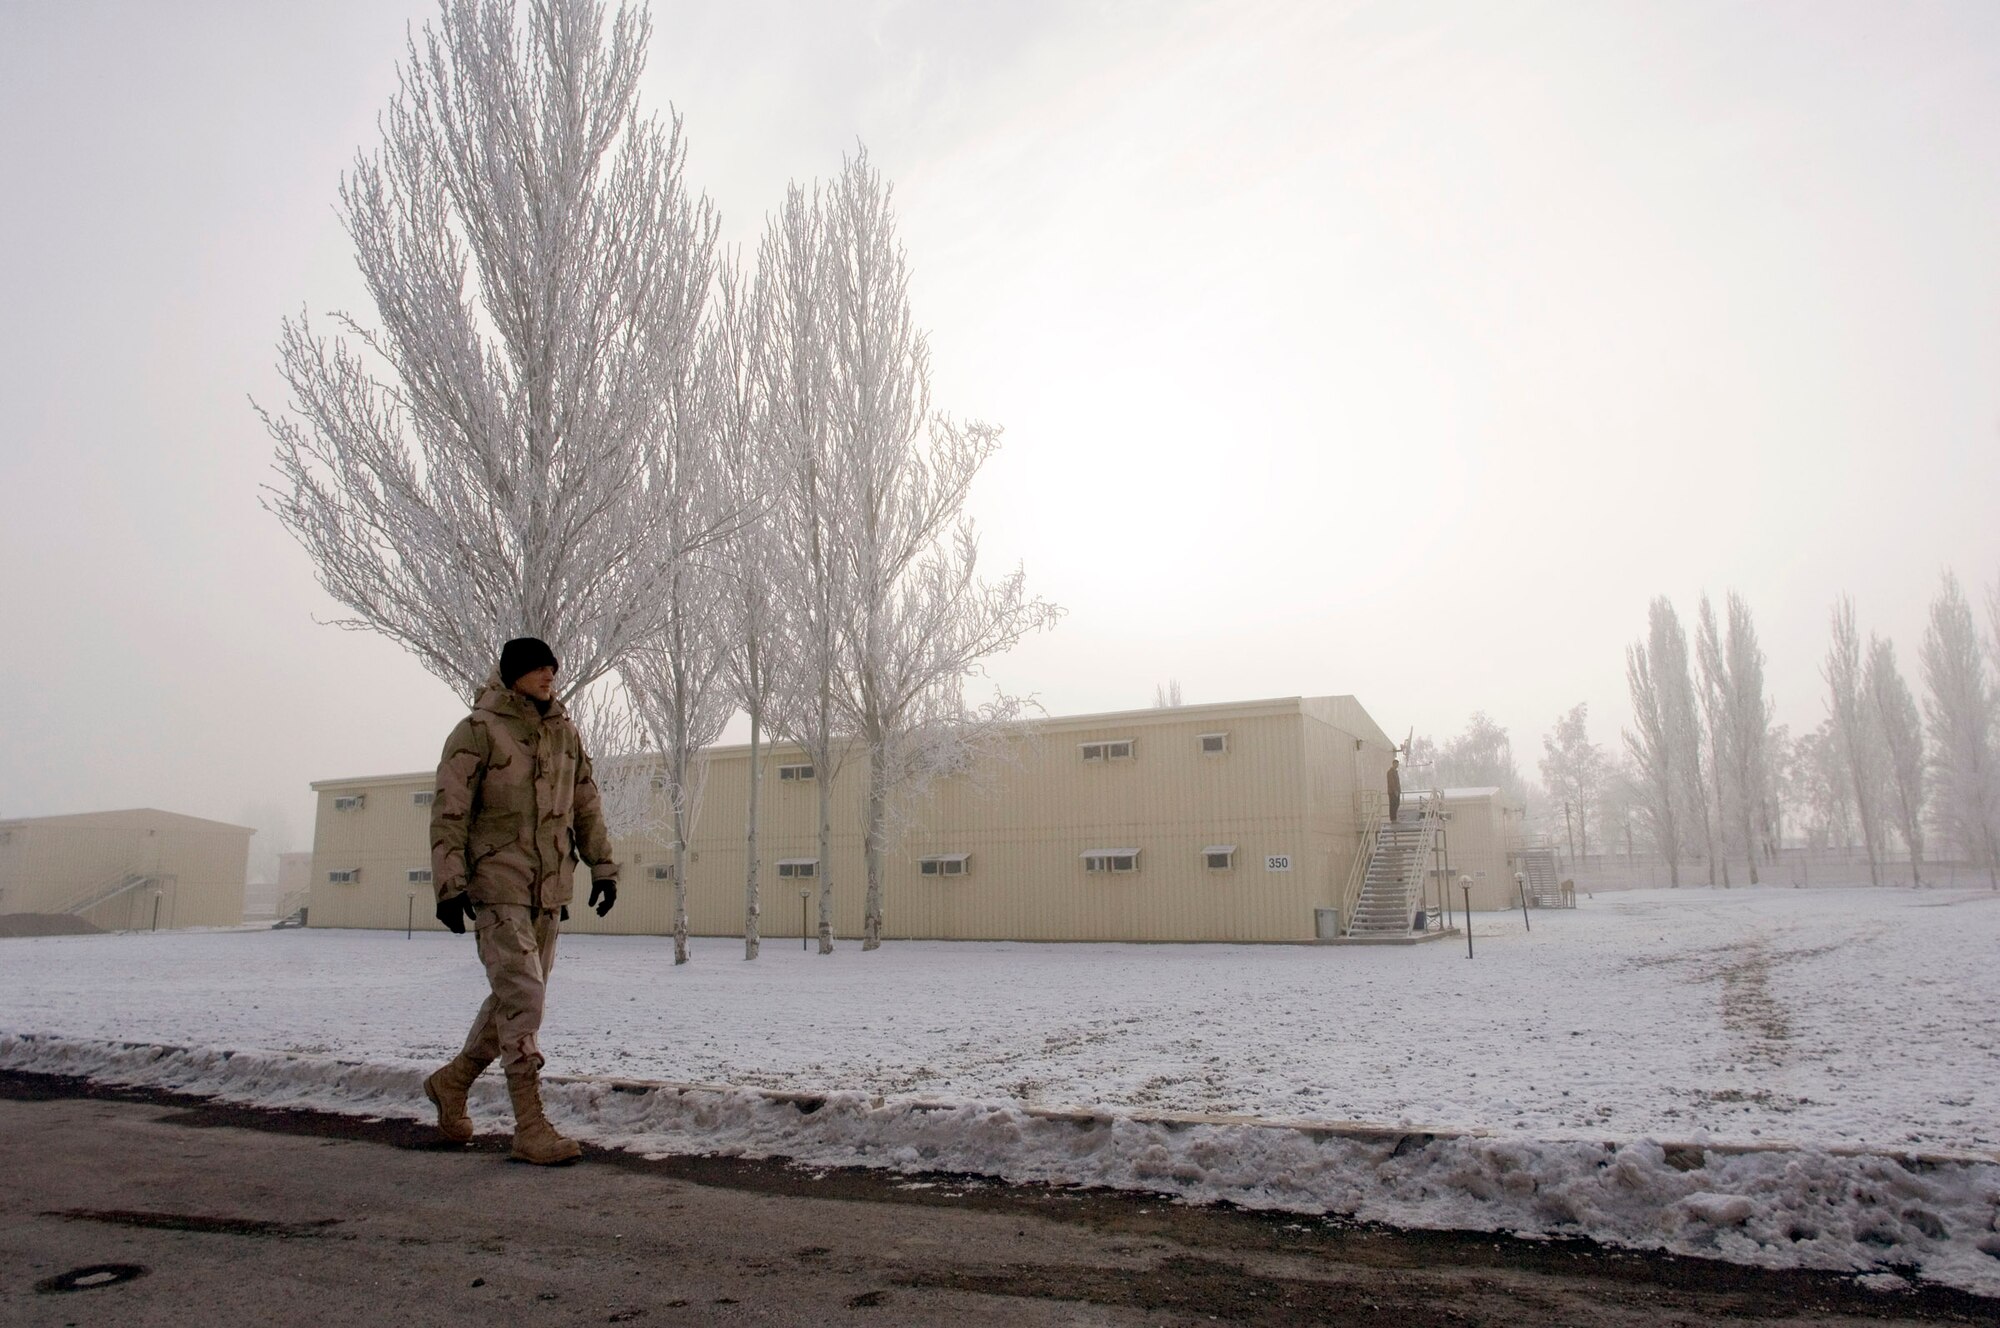 MANAS AIR BASE, Kyrgyzstan (AFPN) -- An Airman with the 376th Air Expeditionary Wing walks past the new dormitories here. The base houses nearly 7,000 people who move in and out of the region. (U.S. Air Force photo by Master Sgt. John E. Lasky)